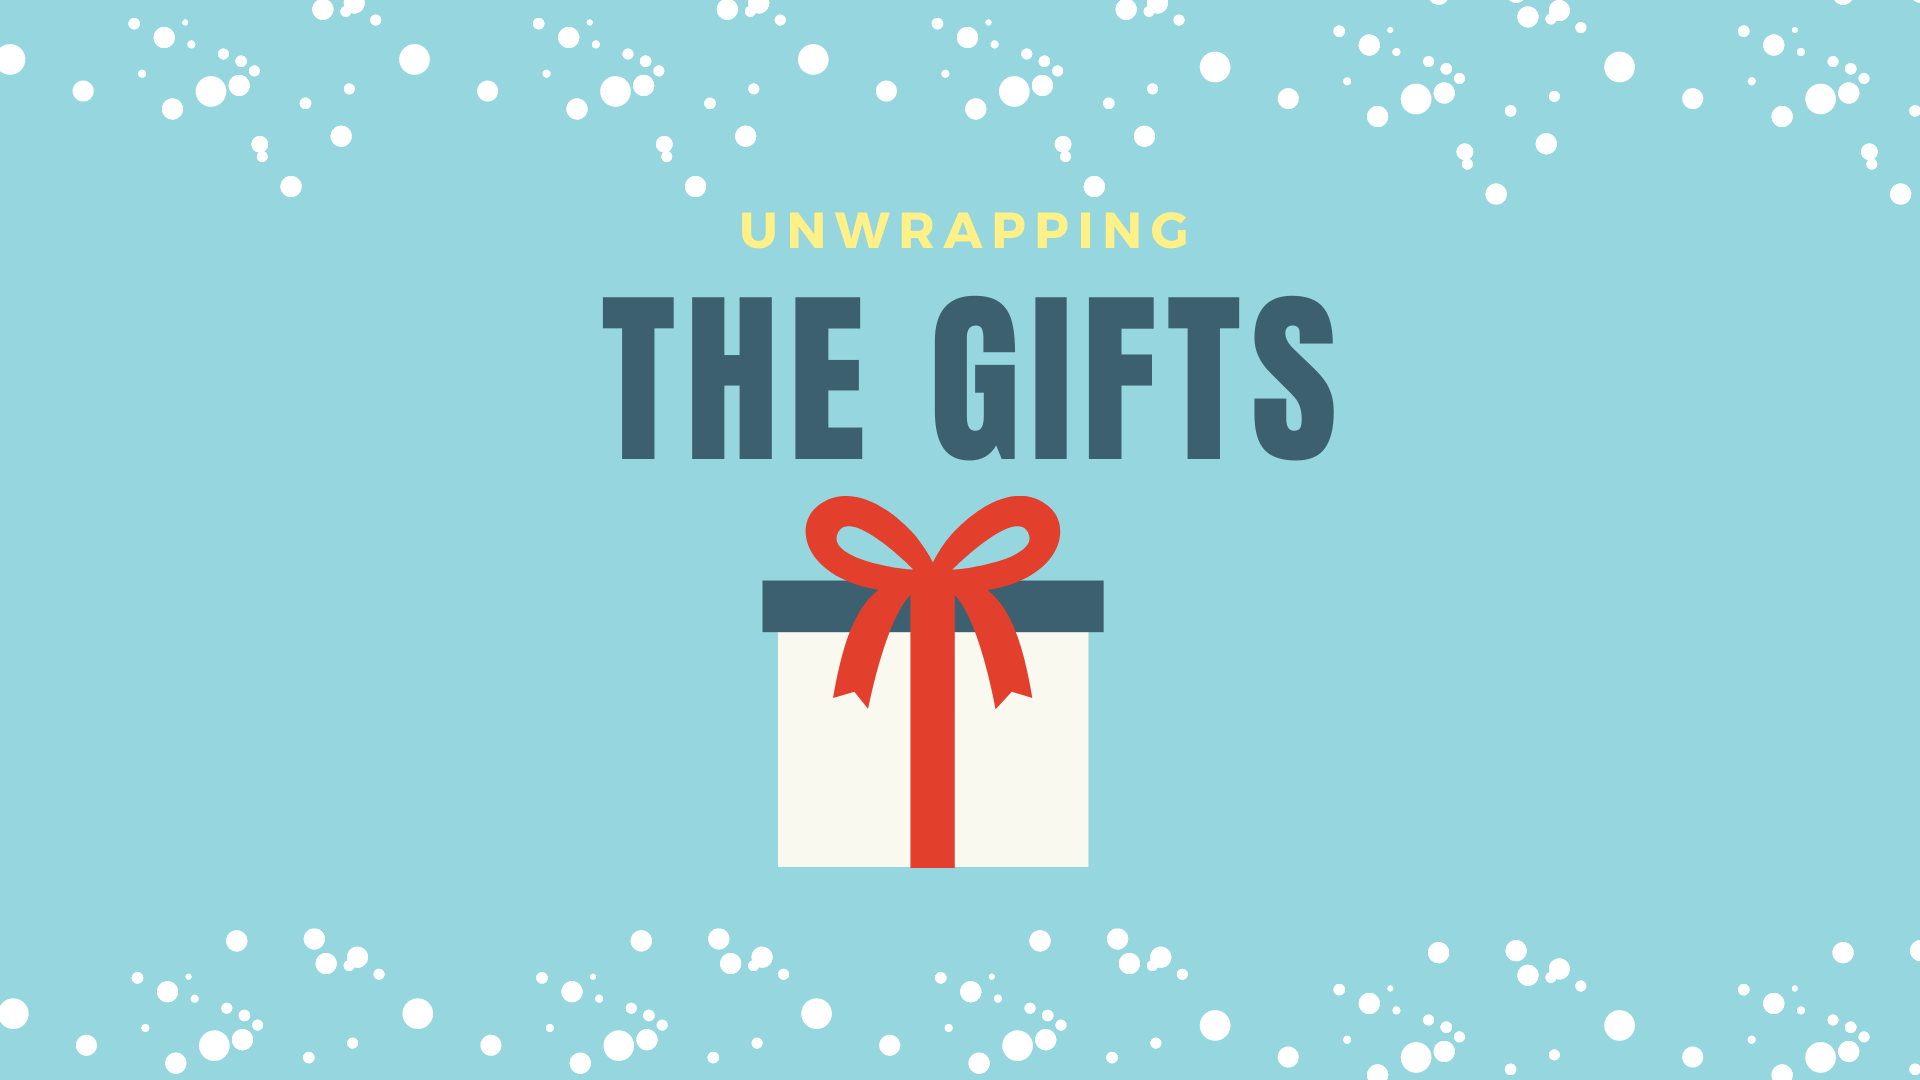 Unwrapping the Gifts